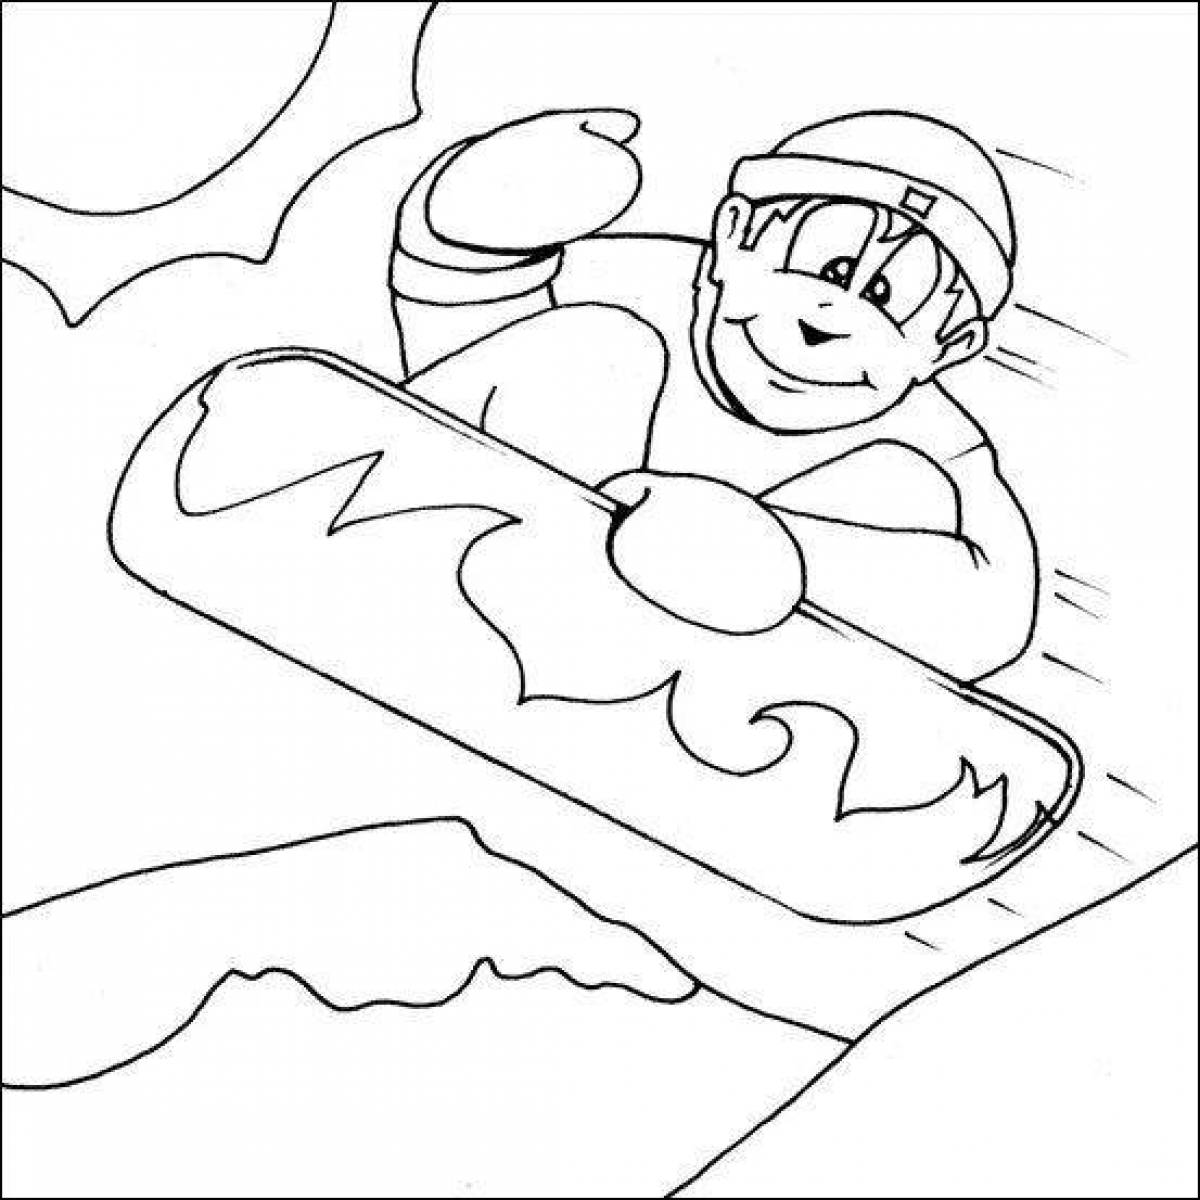 Coloring playful snowboarder